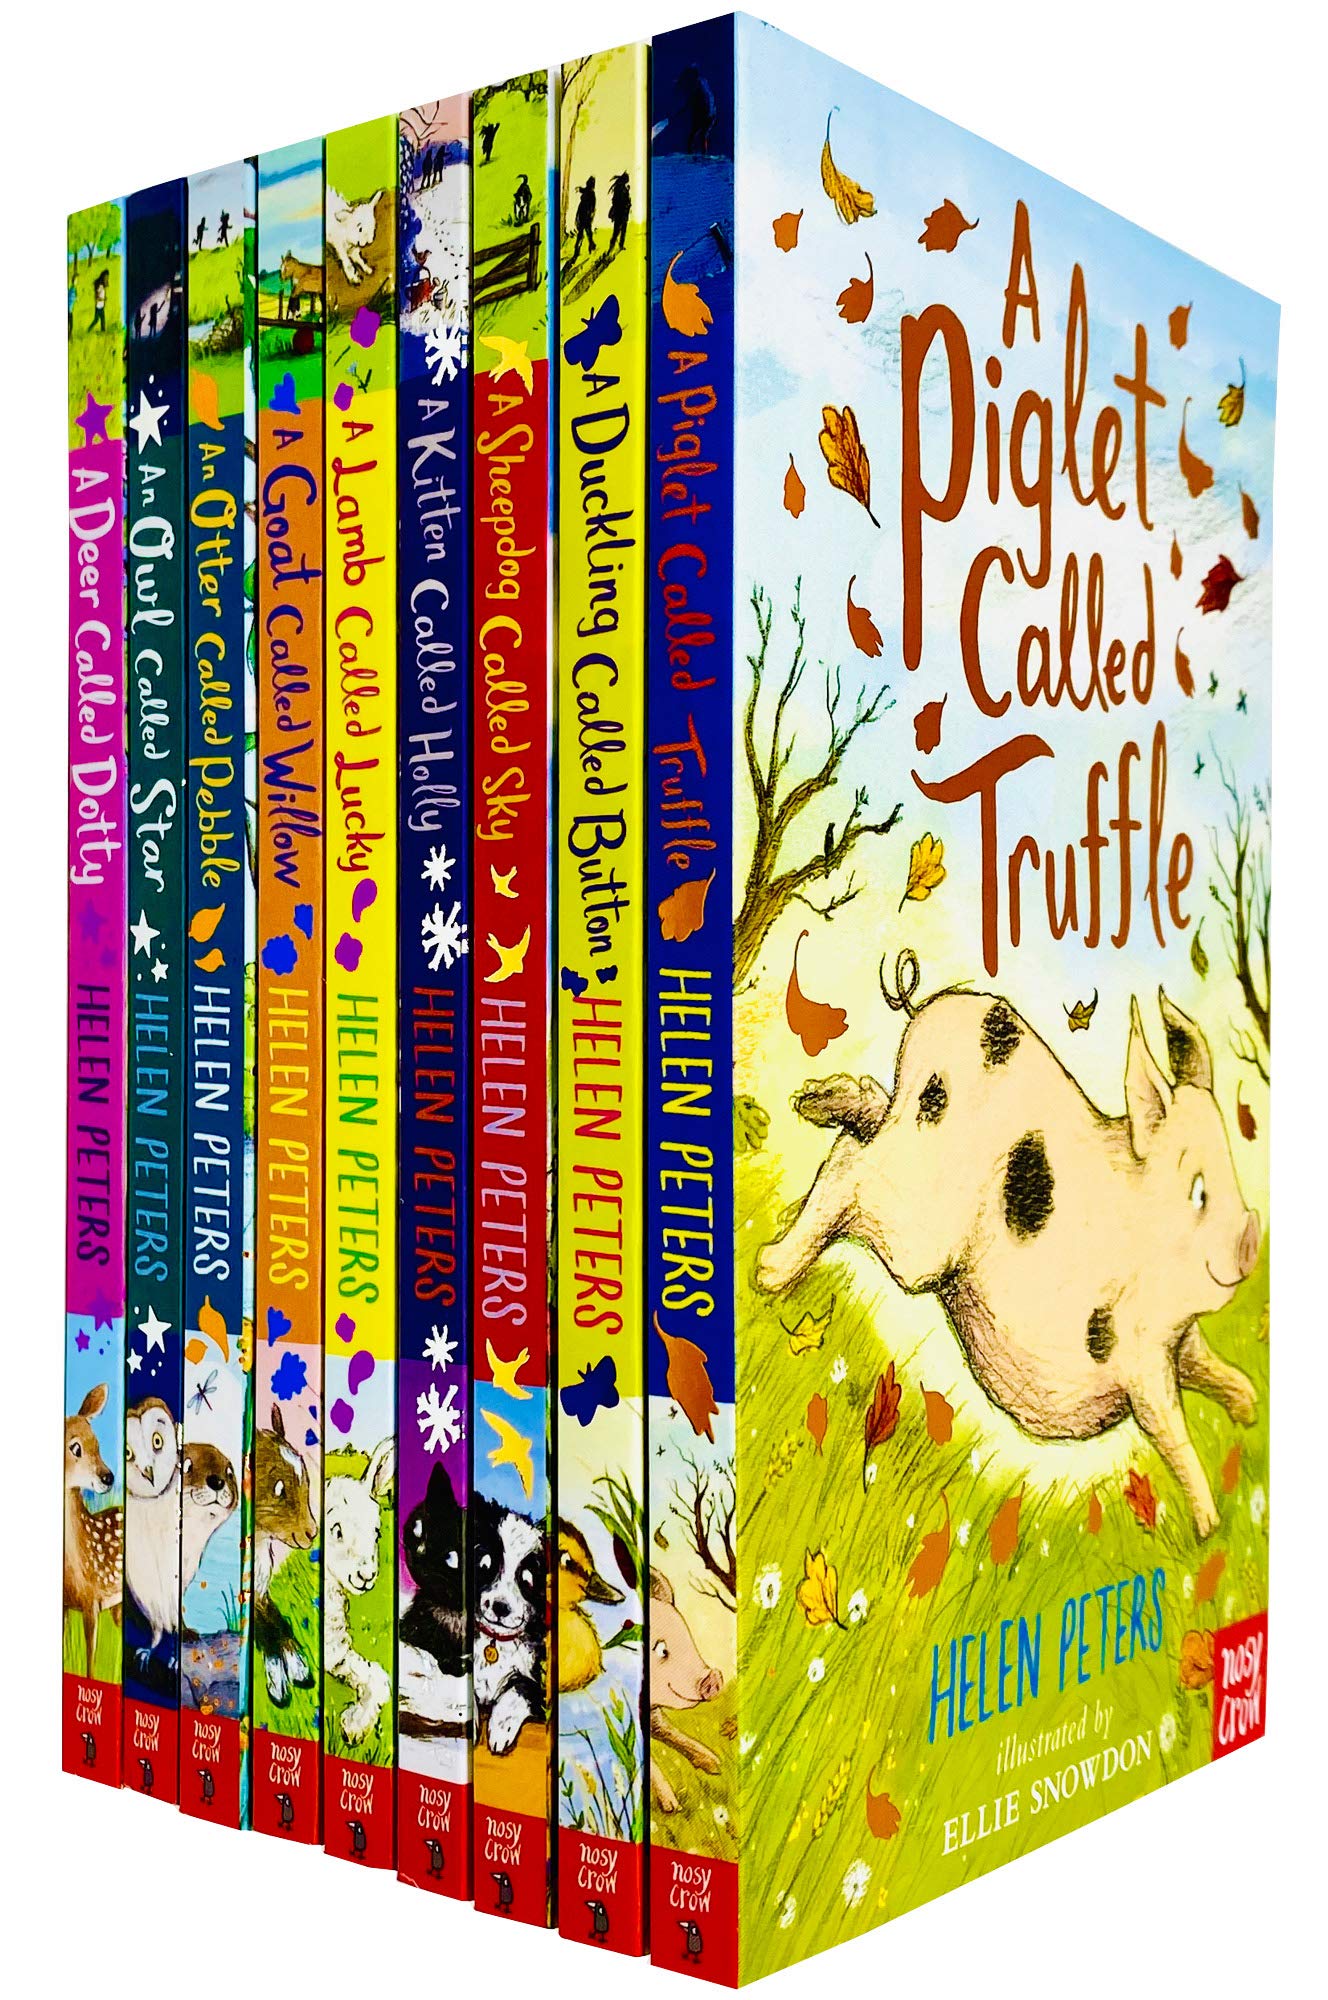 The Jasmine Green Series 9 Books Collection Set by Helen Peters Deer Called Dotty - Lets Buy Books